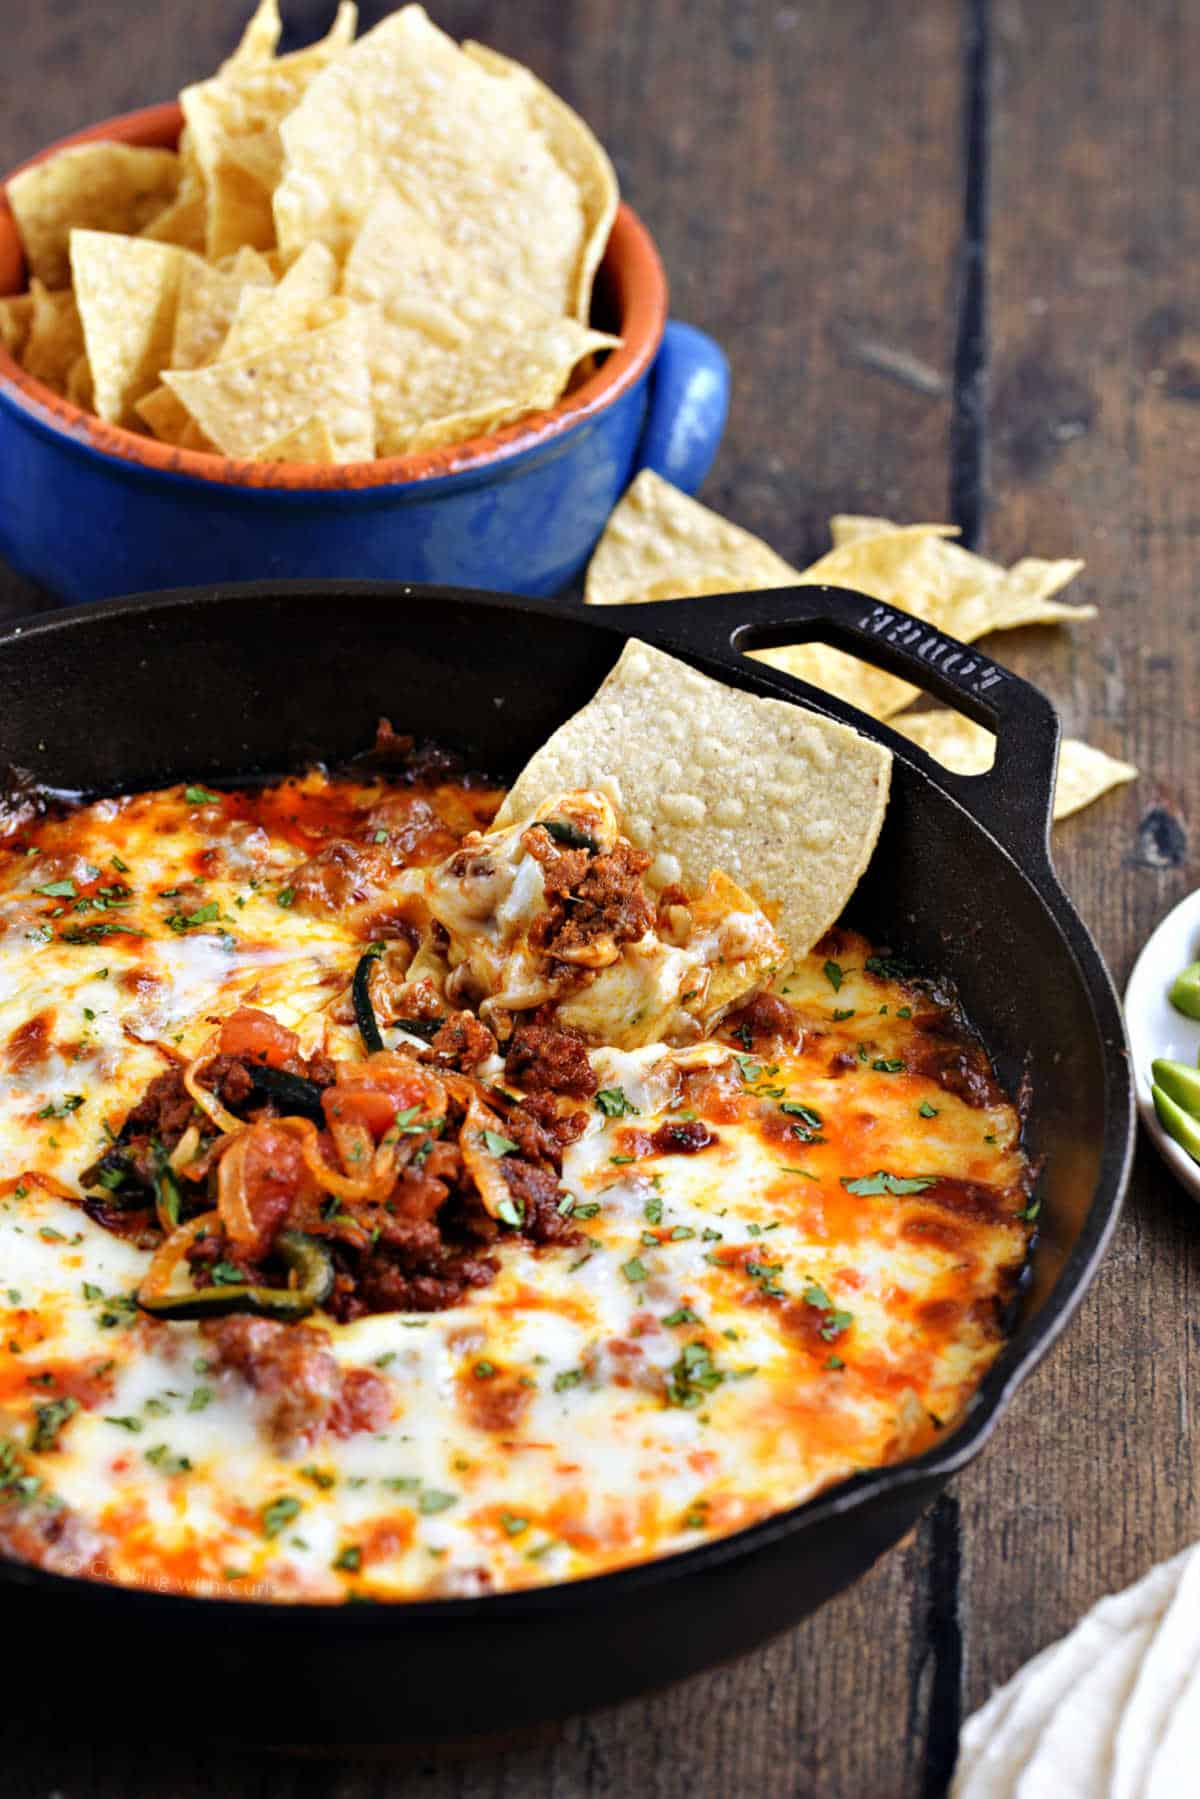 Queso Fundido Mexican melted cheese in a skillet with tortilla chips.